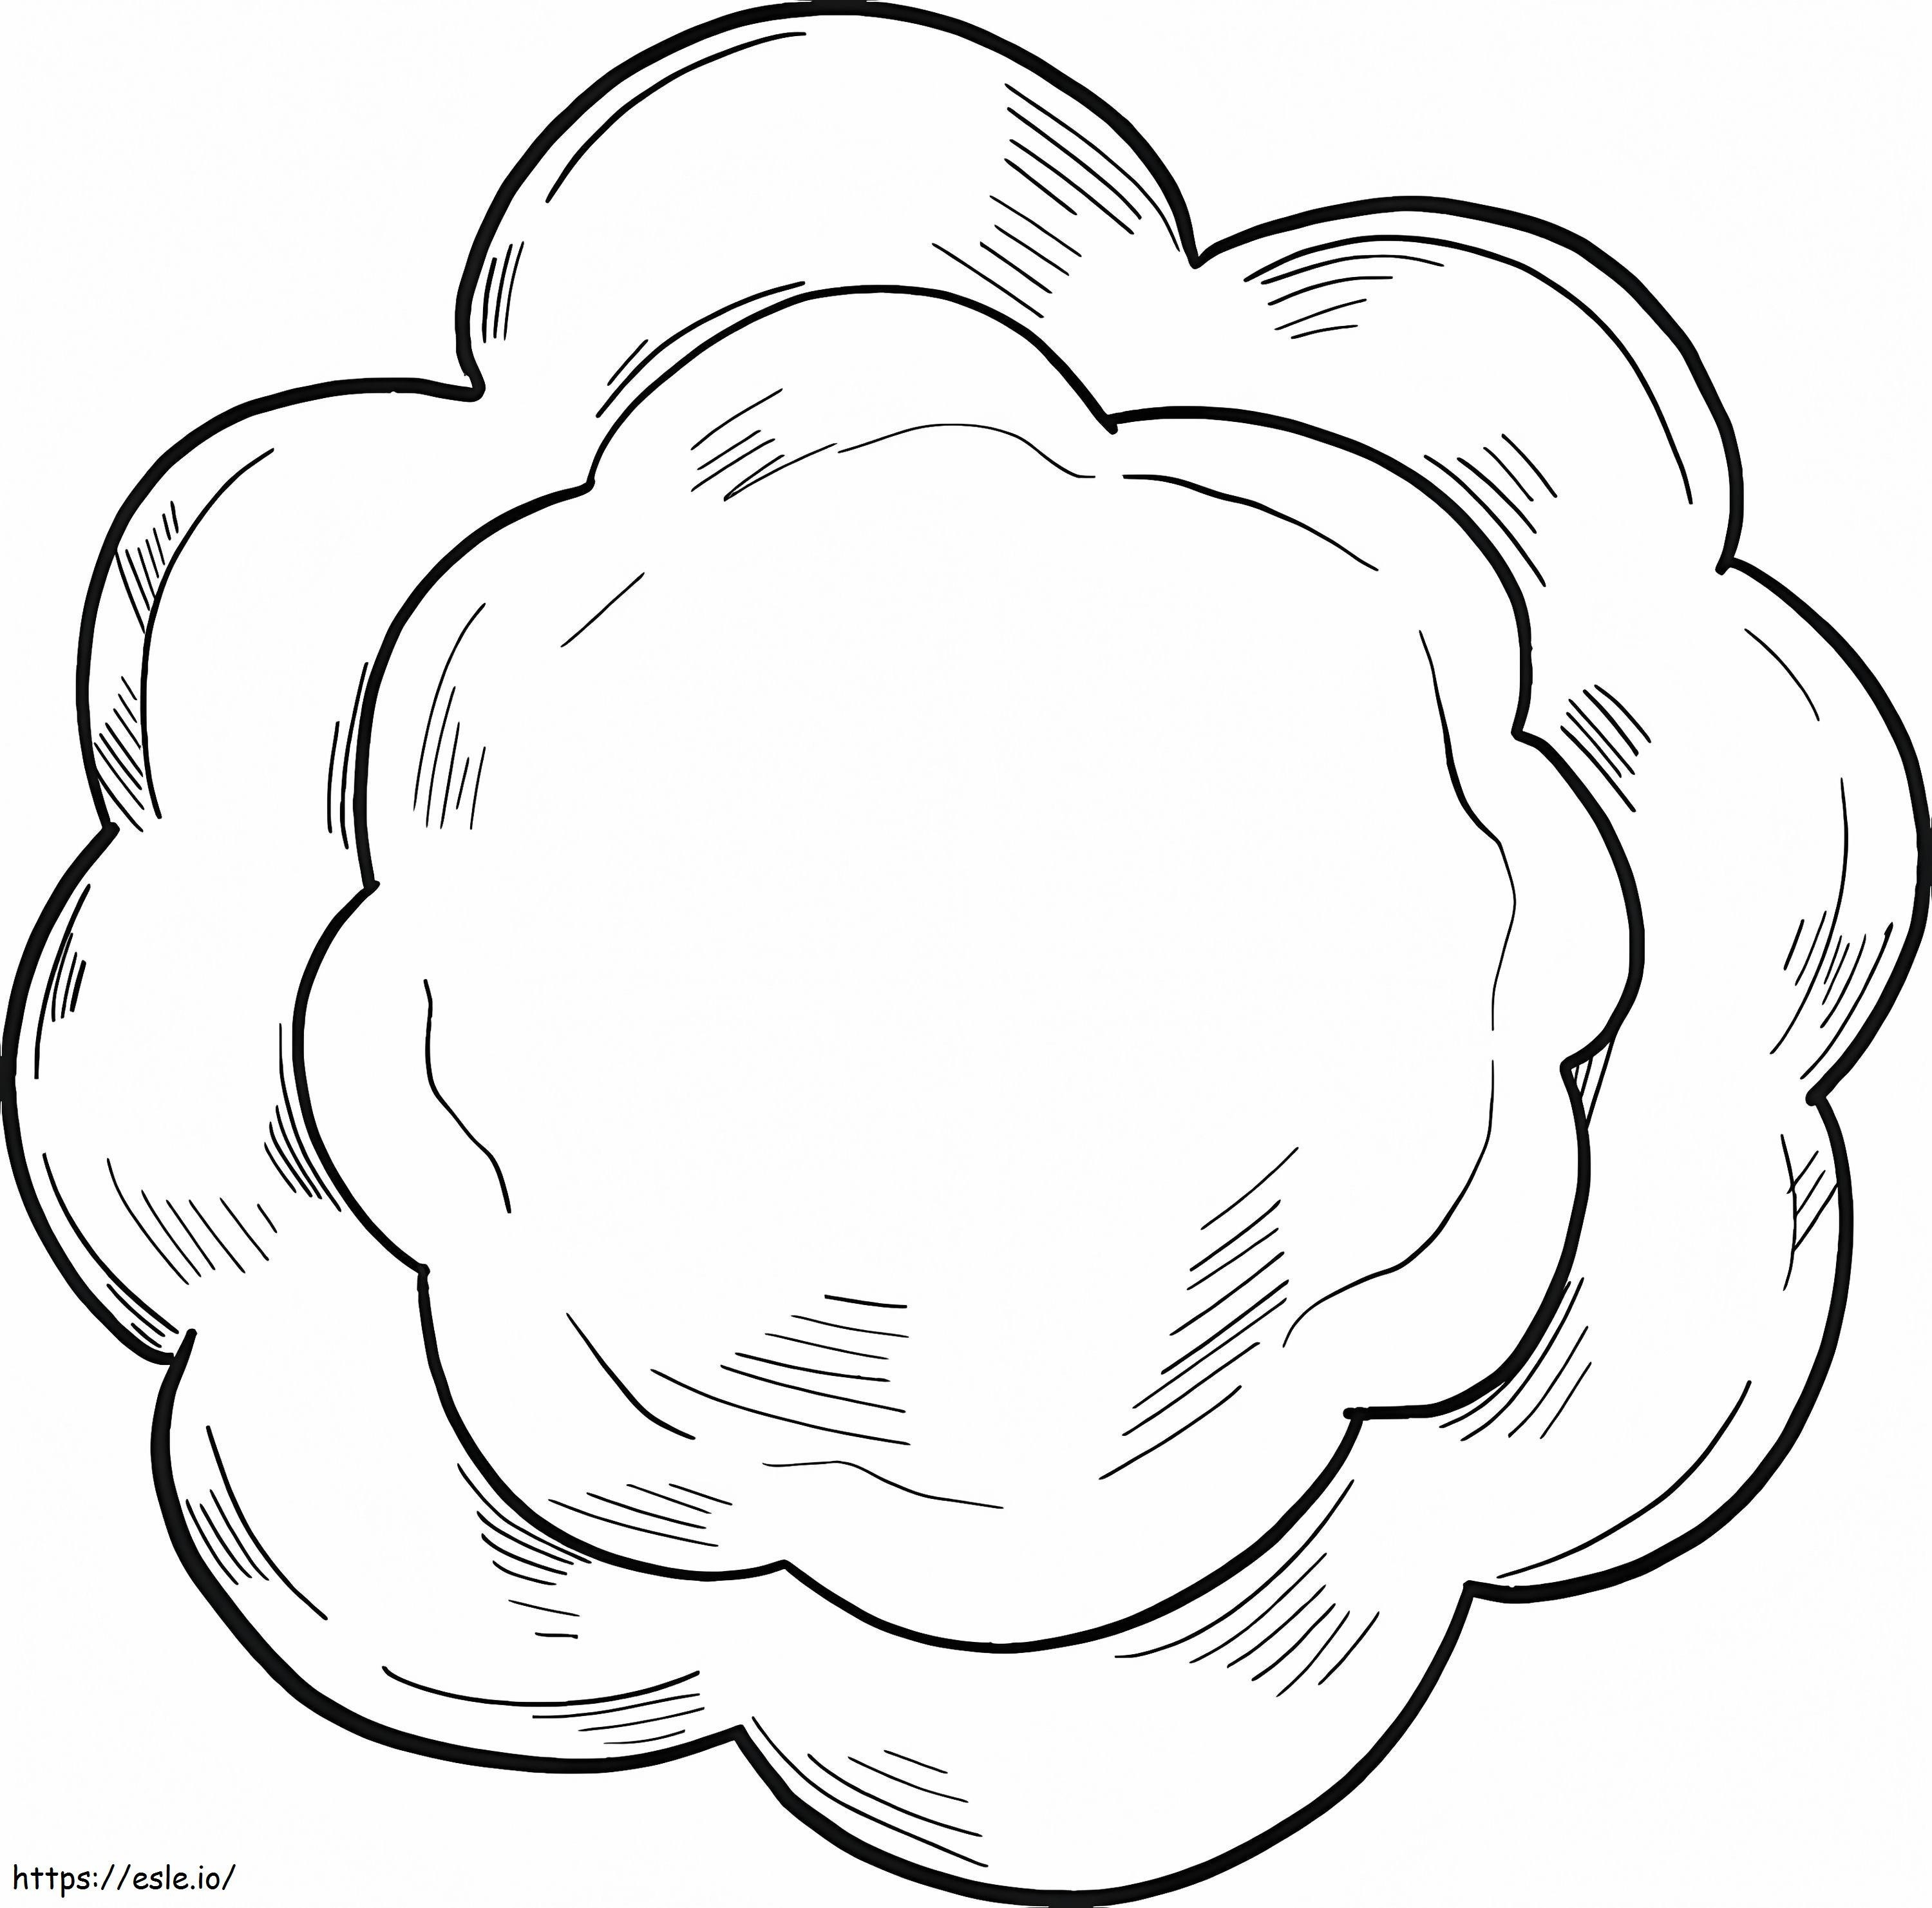 Christmas Cookie 1 coloring page